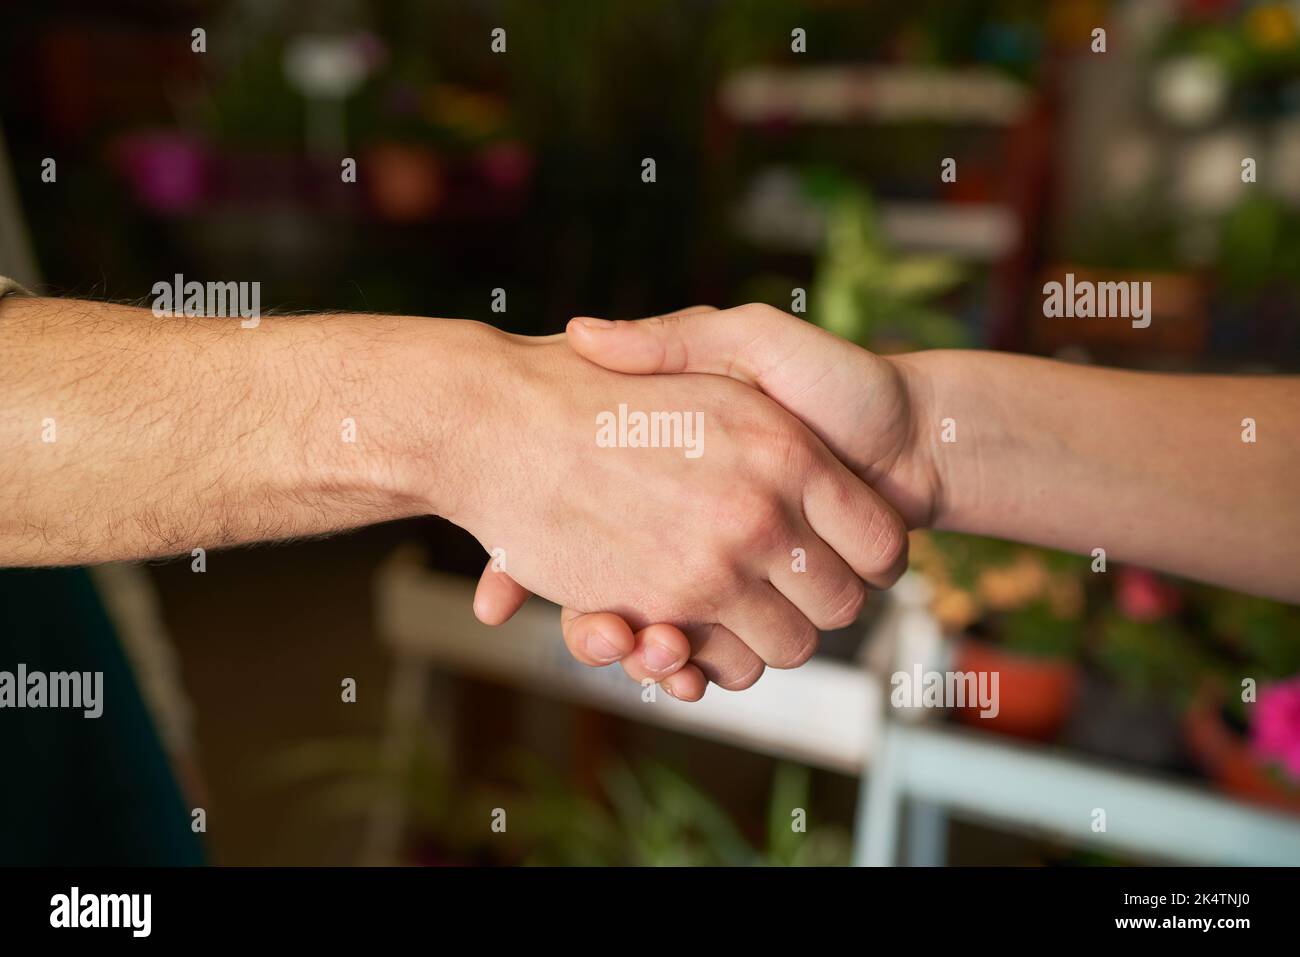 Shaking hands as a concept for congratulation and greeting between business people Stock Photo